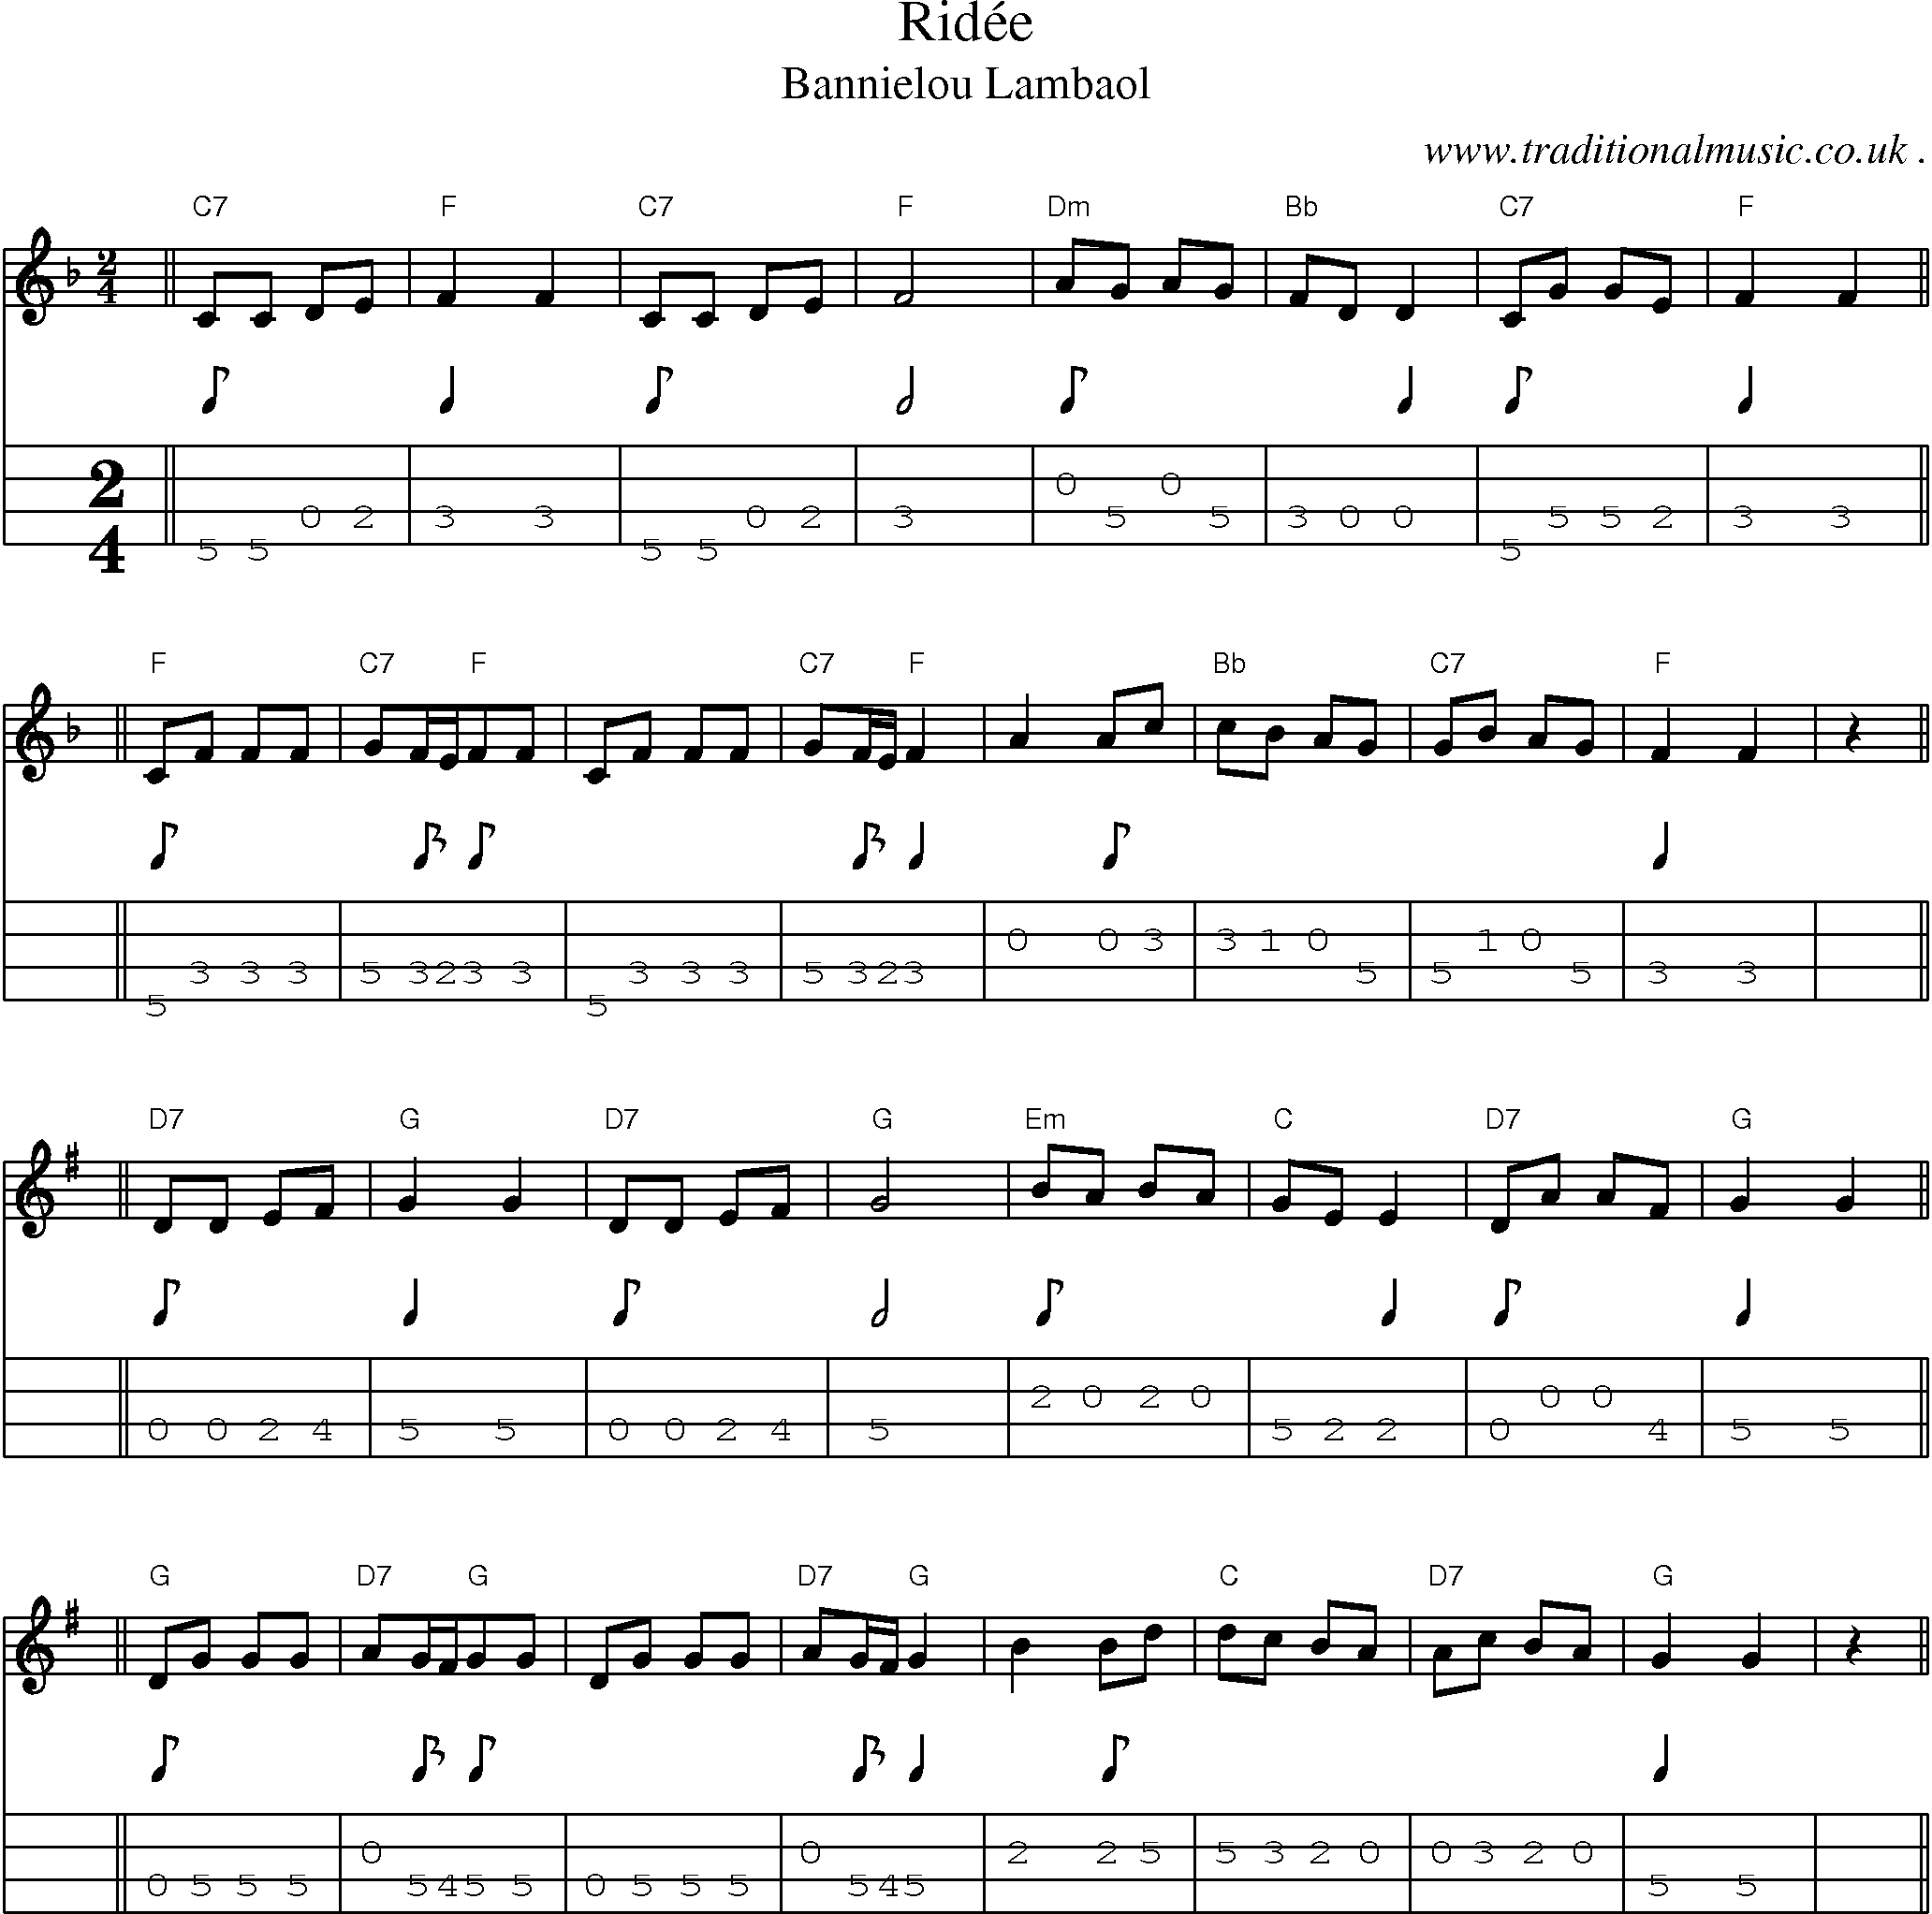 Sheet-Music and Mandolin Tabs for Ridee